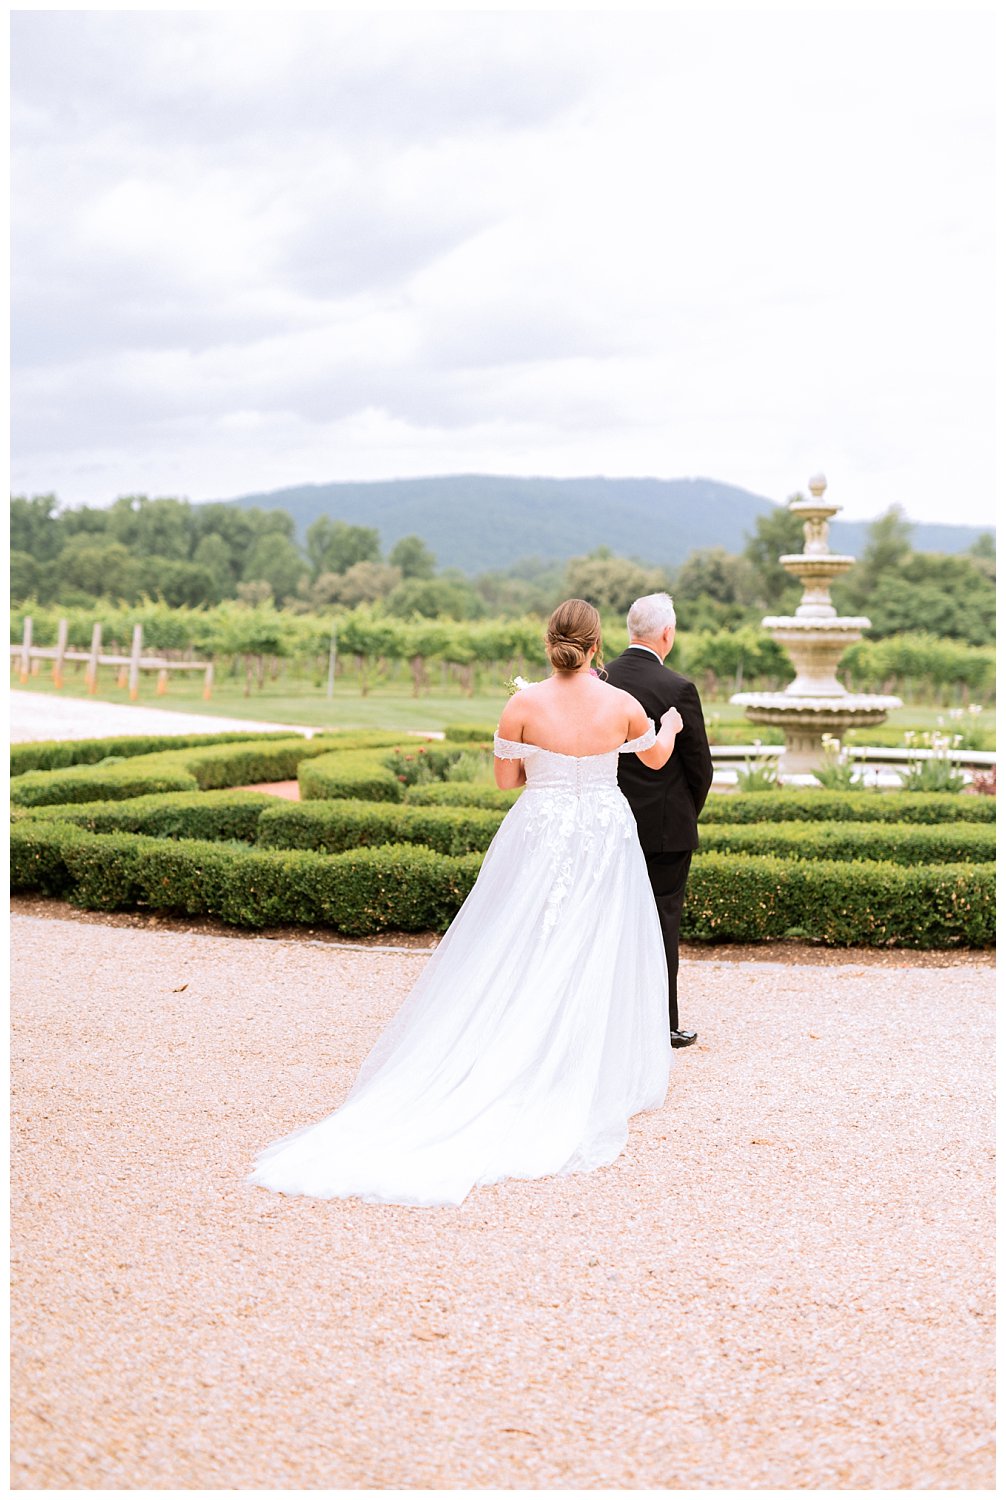 First look between bride and her father for this Virginia vineyard wedding